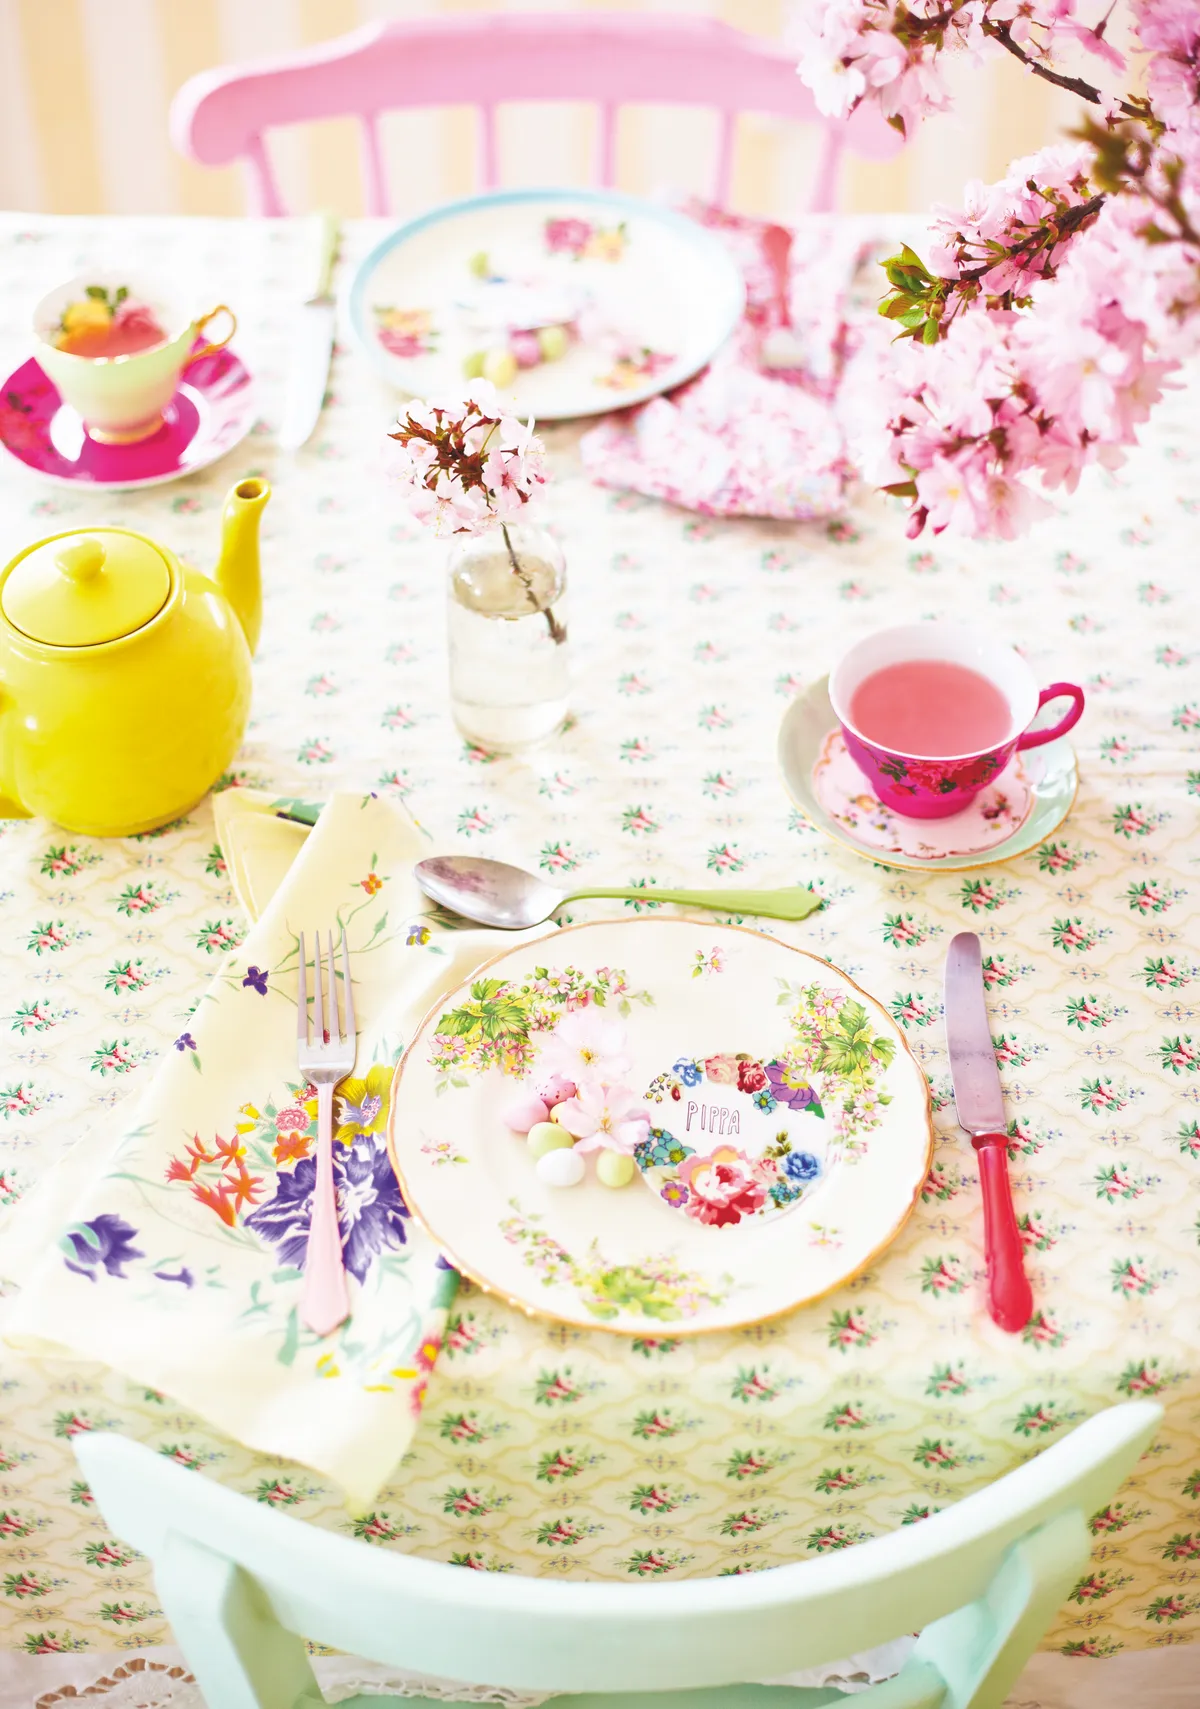 This bright spring dining table oozes vintage charm. Photography: Sussie Bell